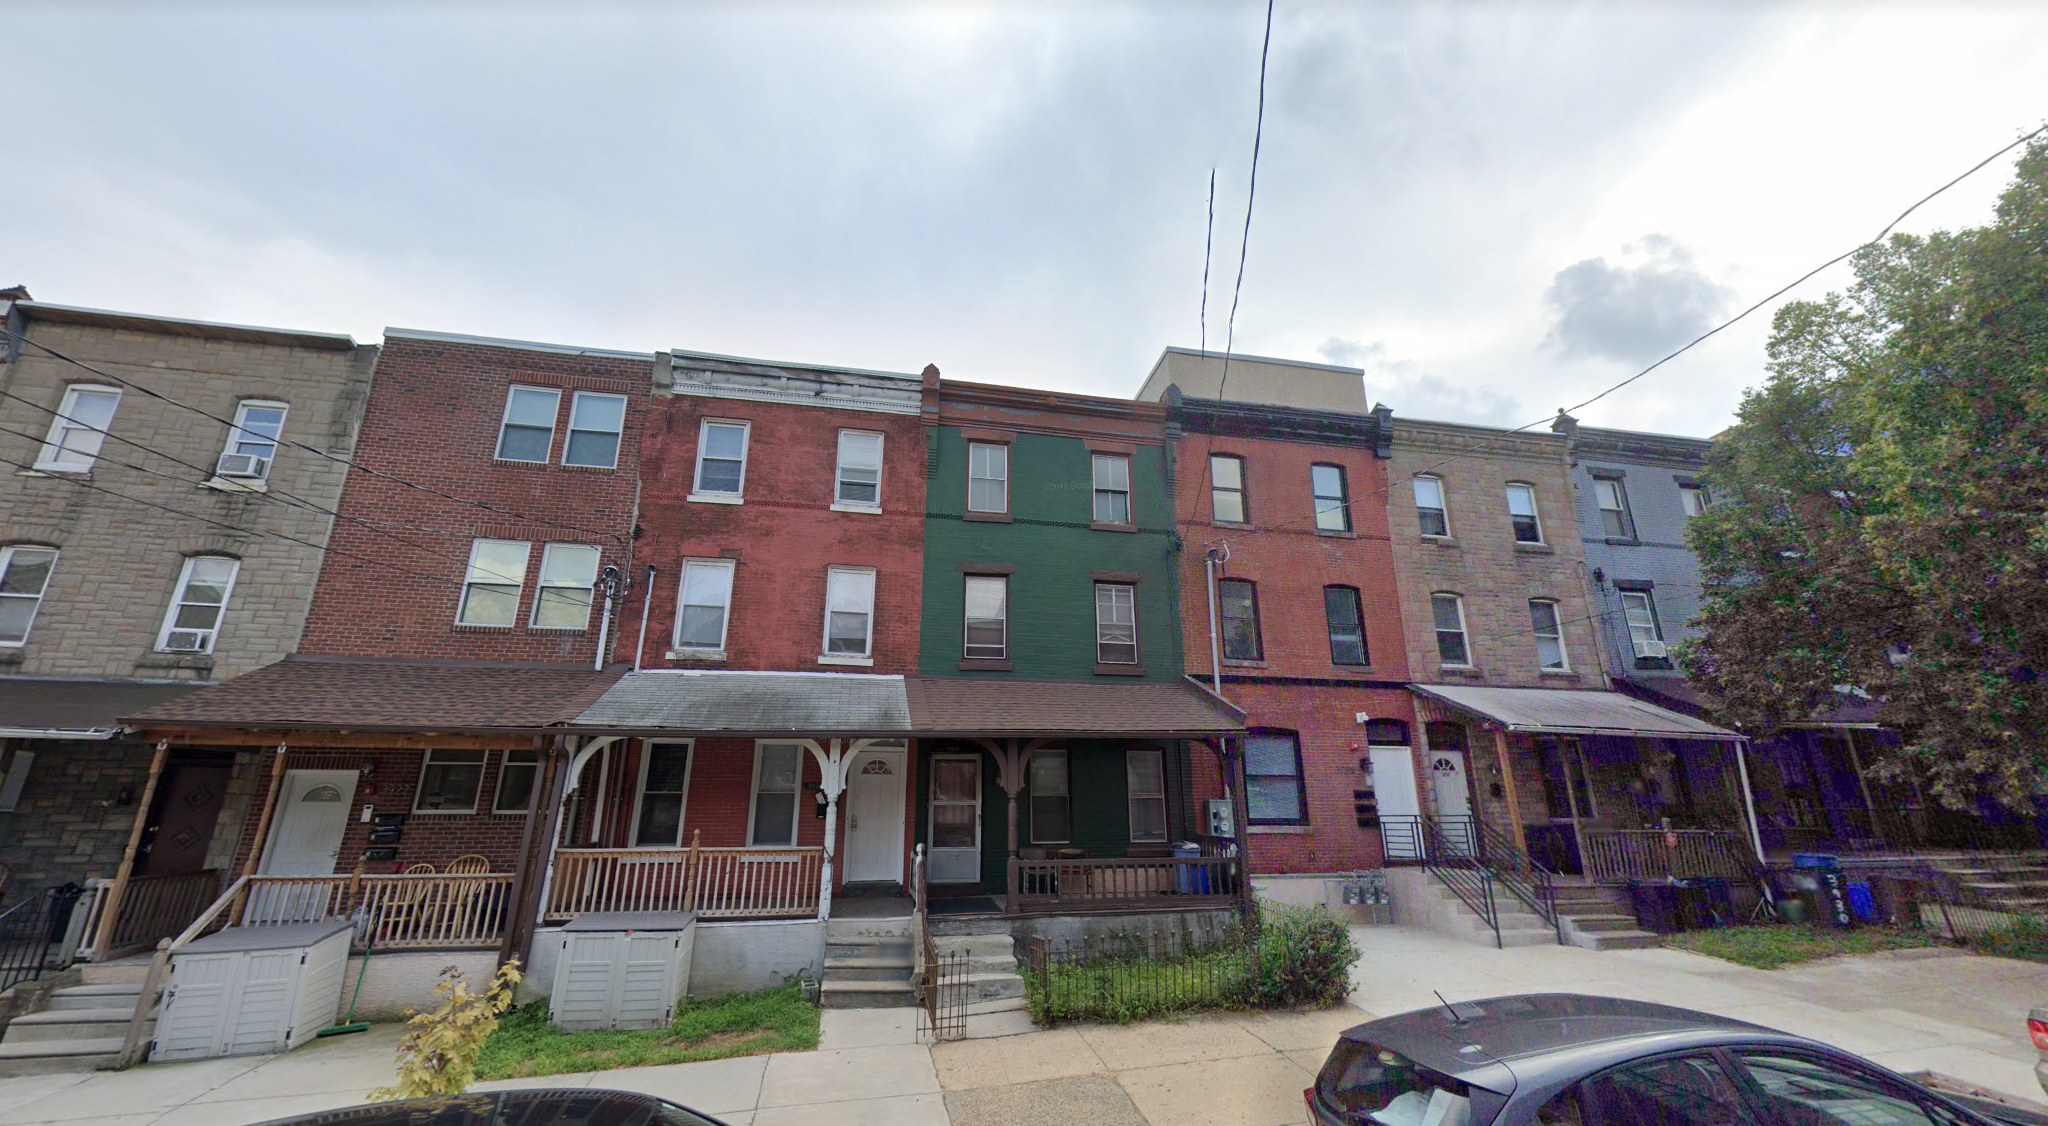 3926 Haverford Avenue prior to renovation. Credit: Google Maps